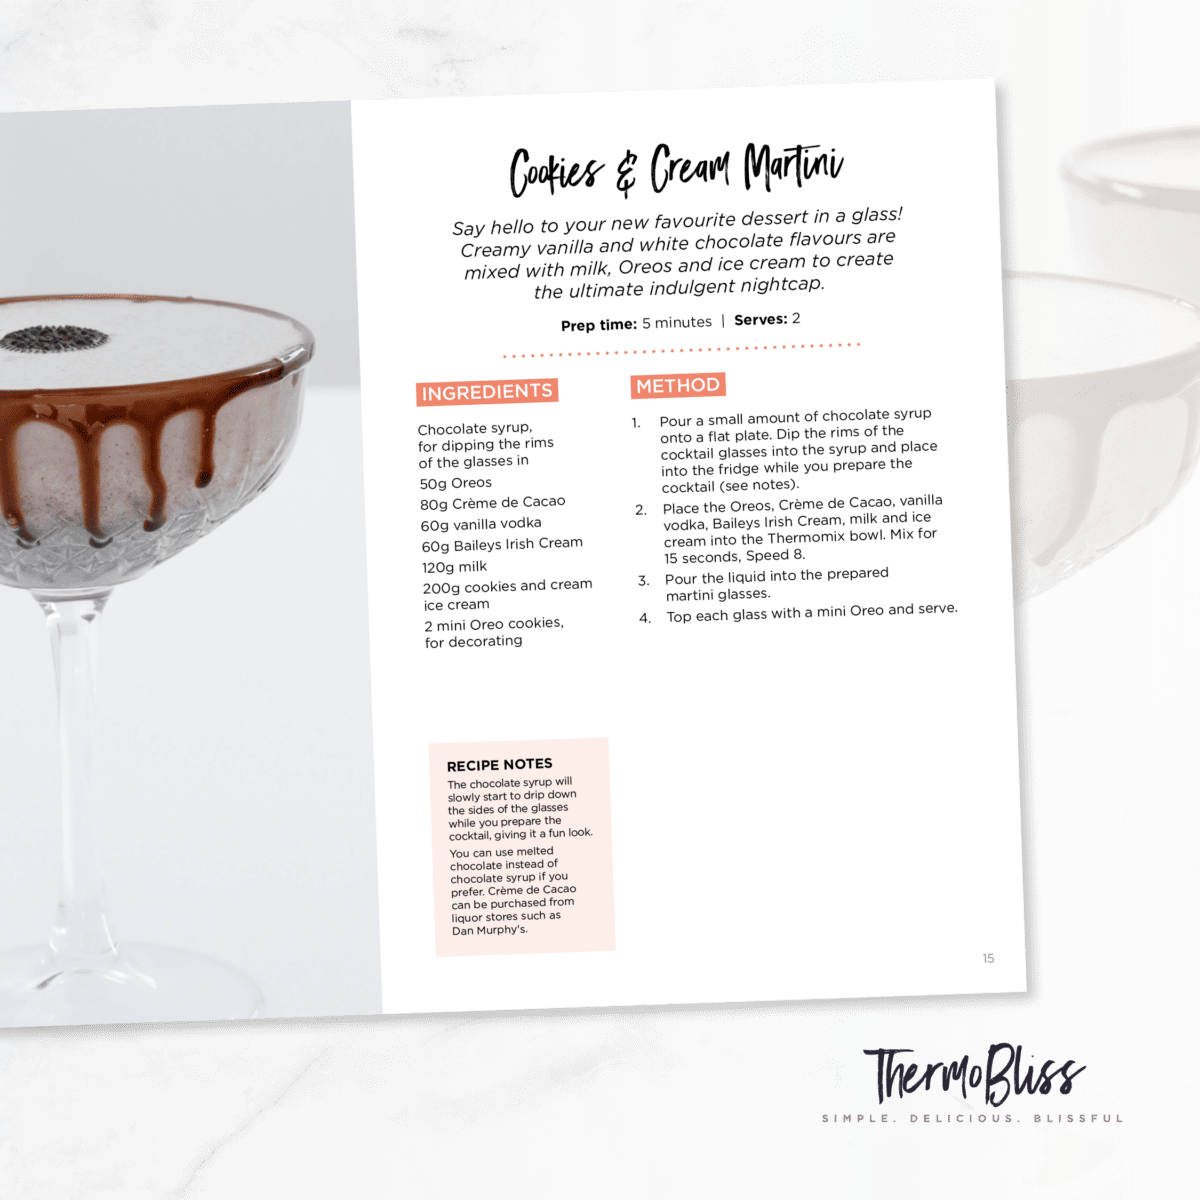 An example recipe page from a cocktails cookbook.